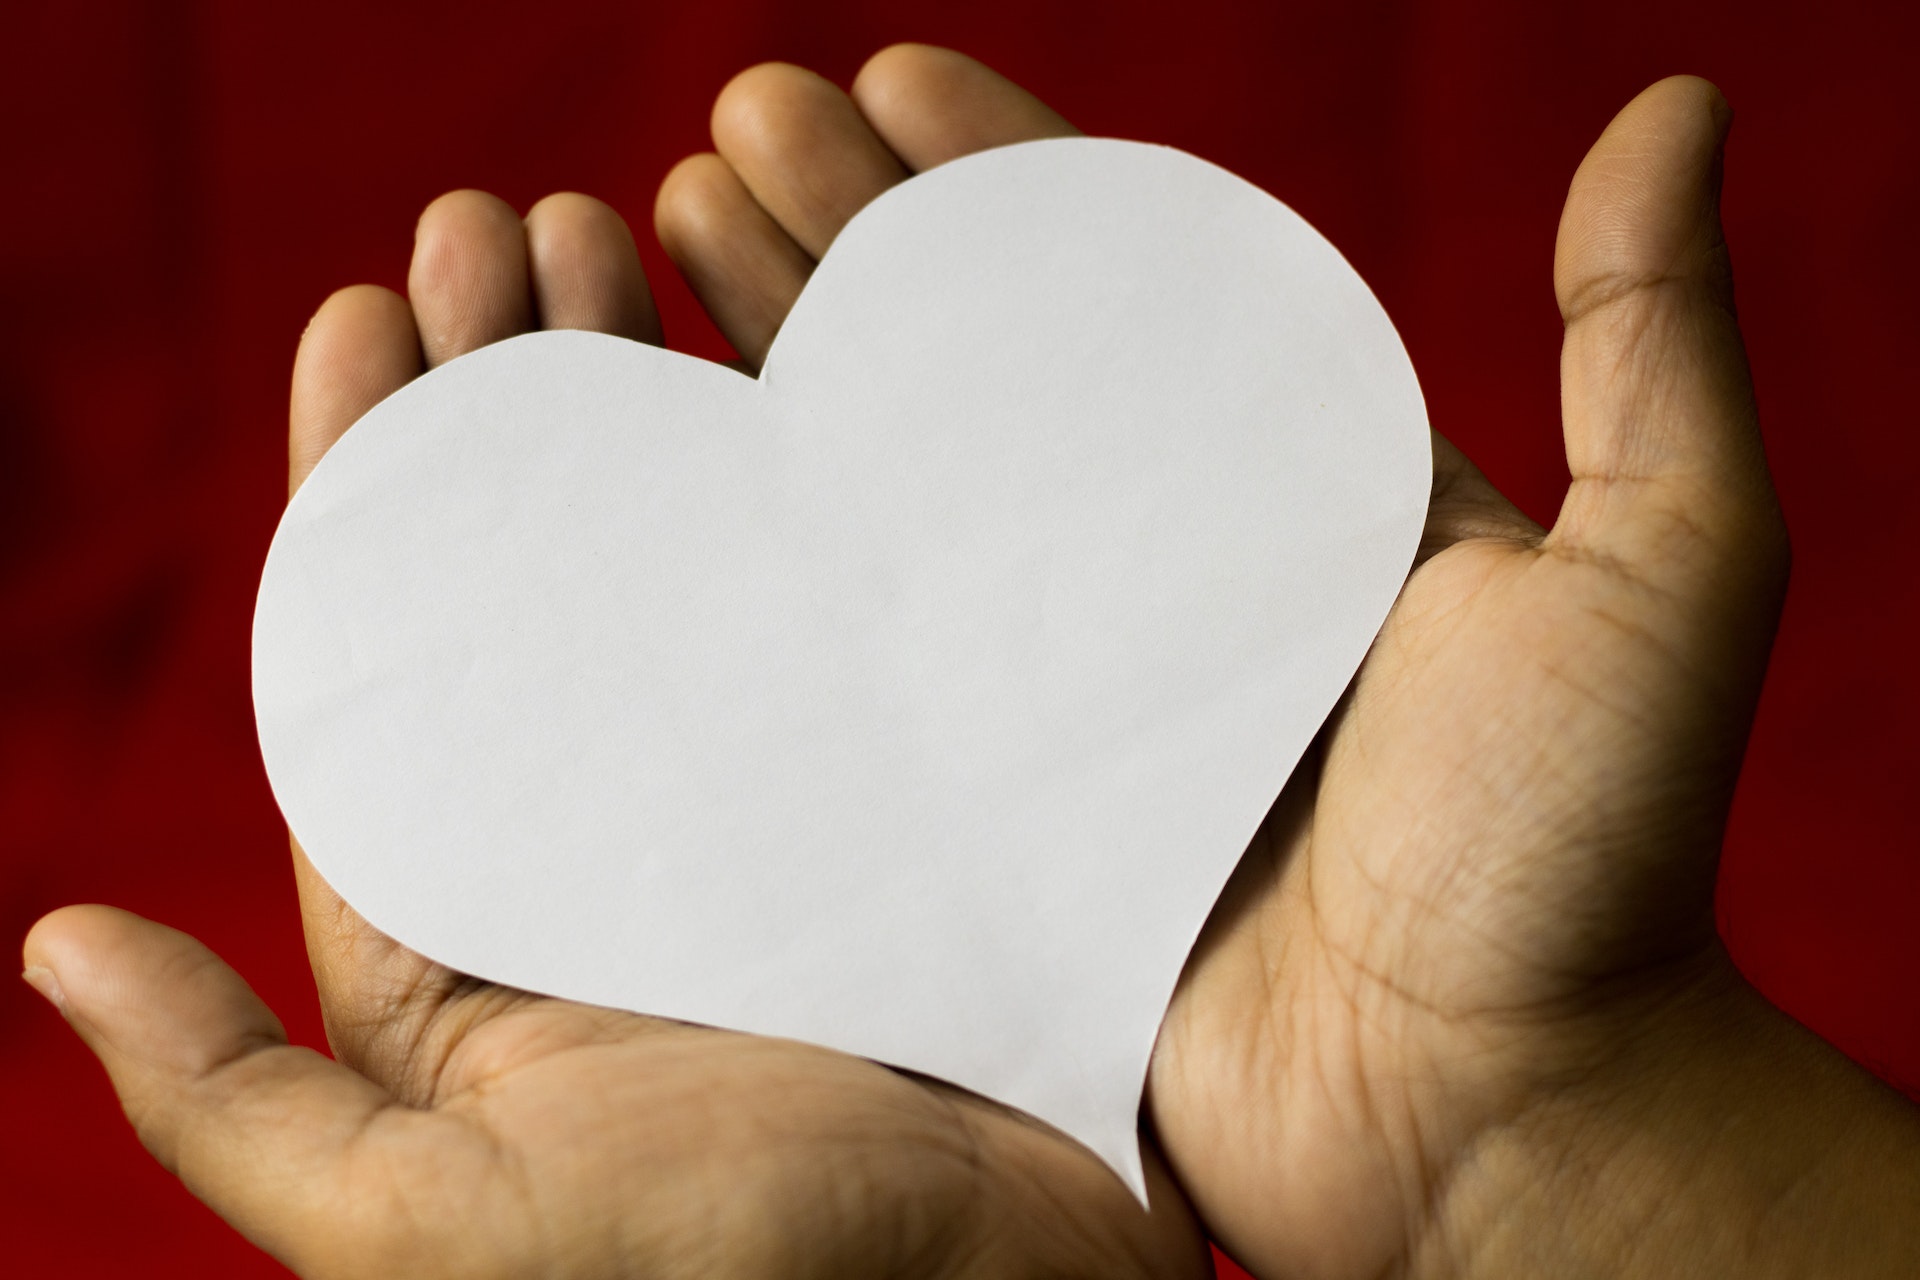 a pair of hands holding a paper heart